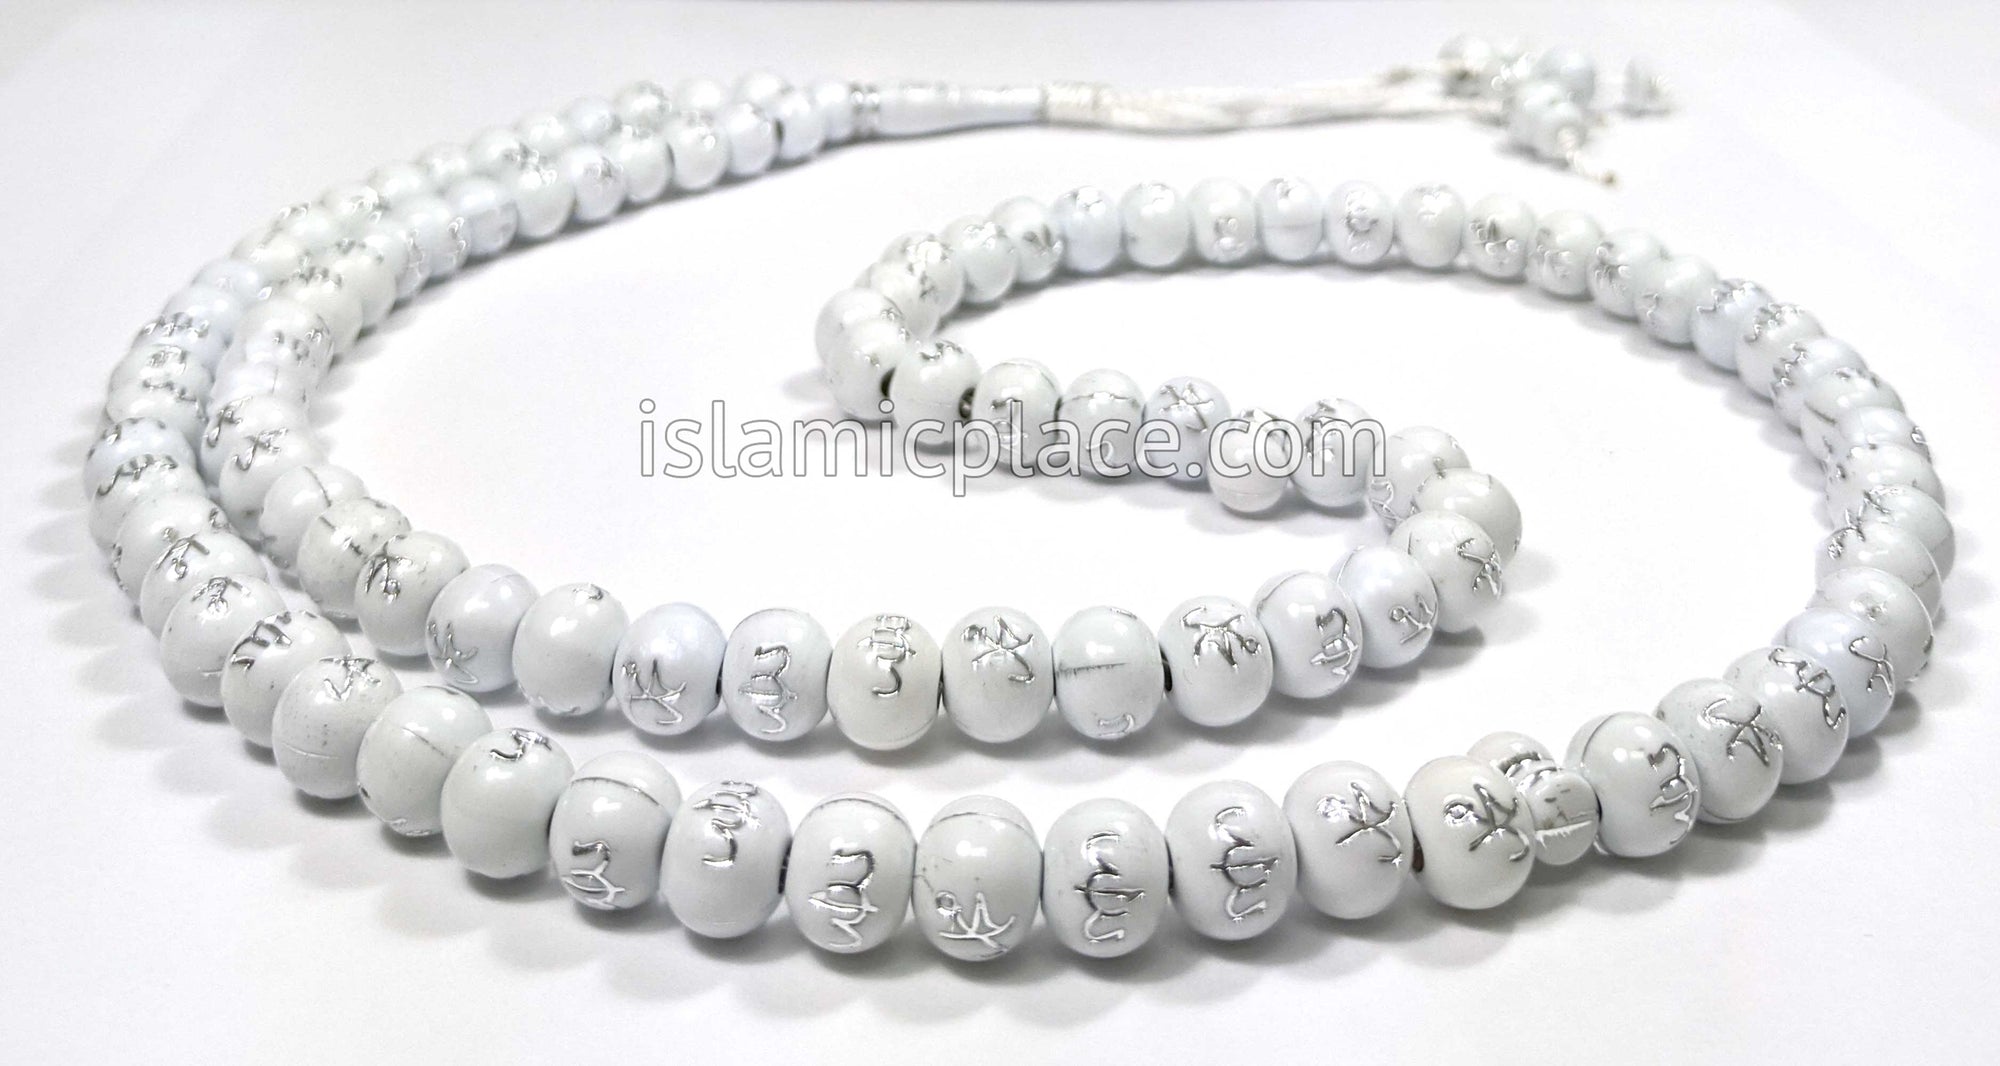 White and Silver - Large Bead Tasbih Prayer Beads with Allah & Muhammad Script